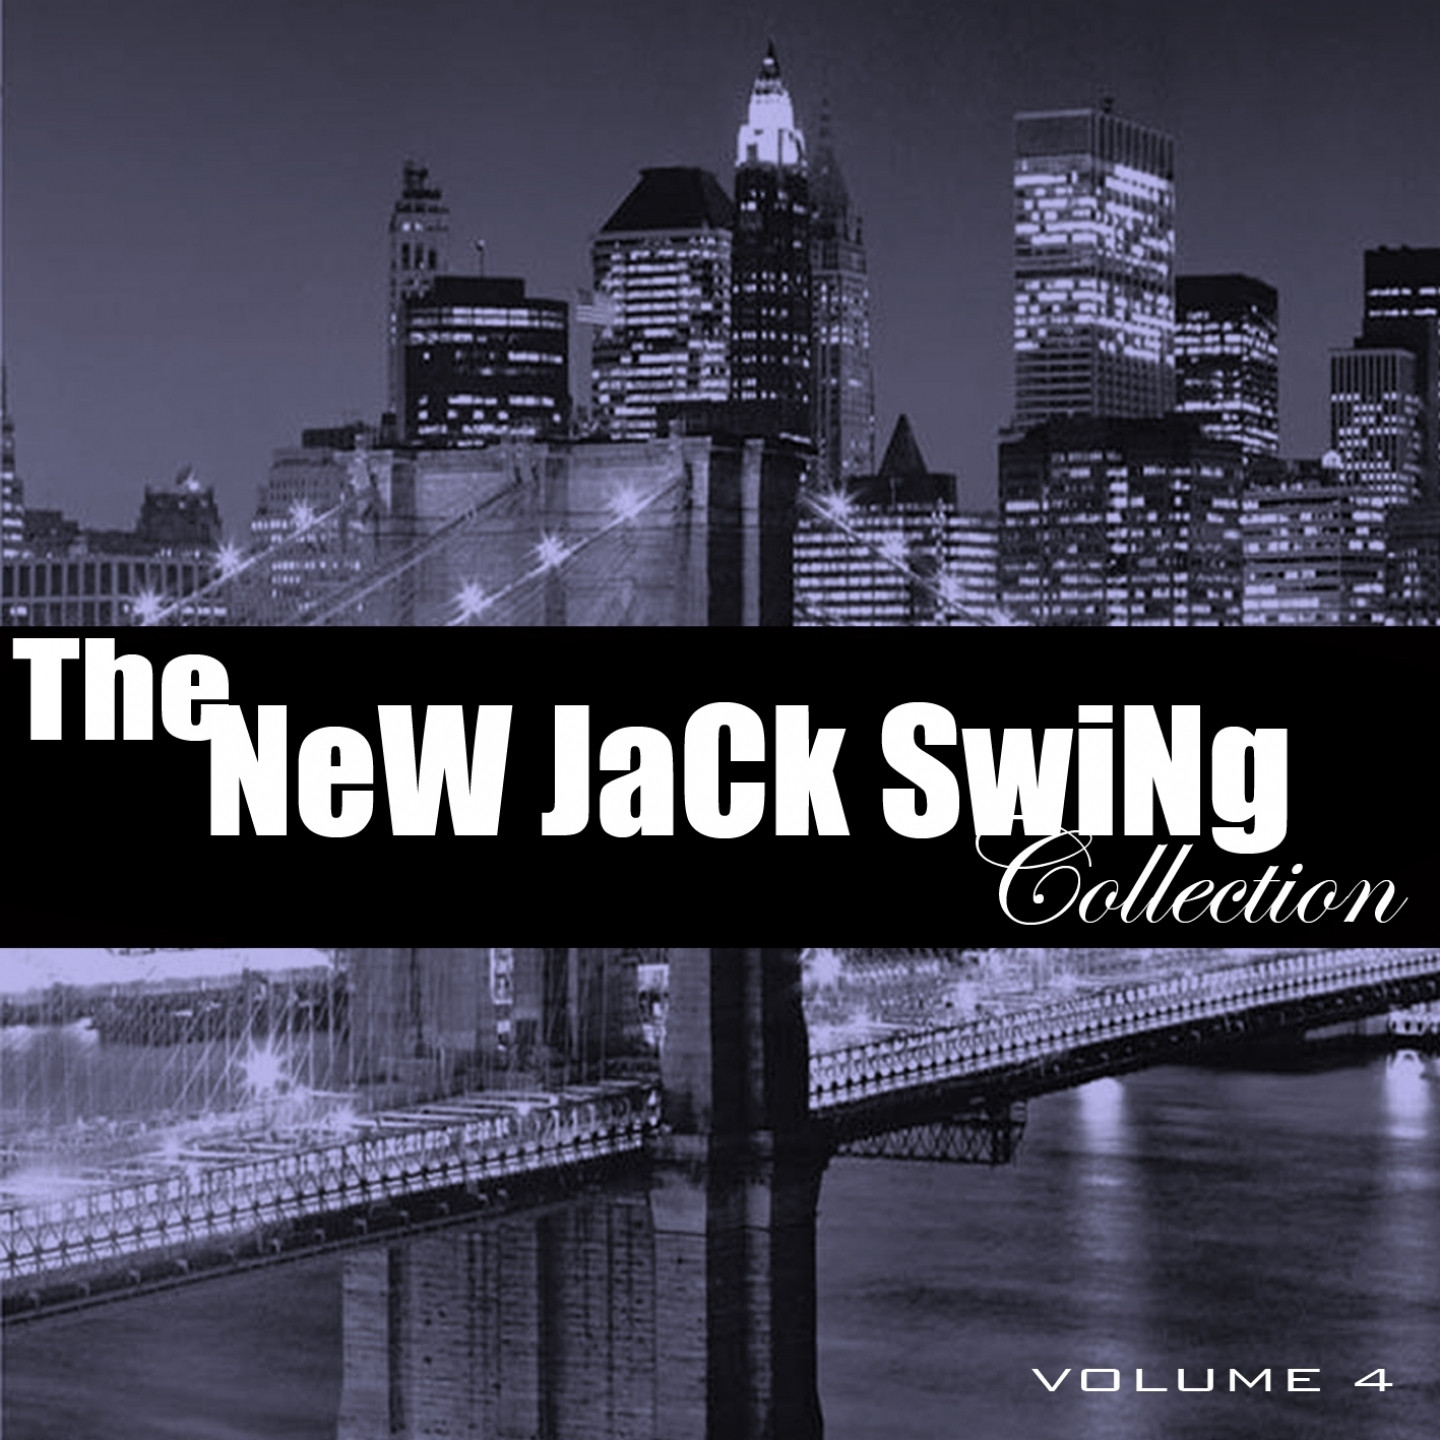 The New Jack Swing Collection, Vol. 4